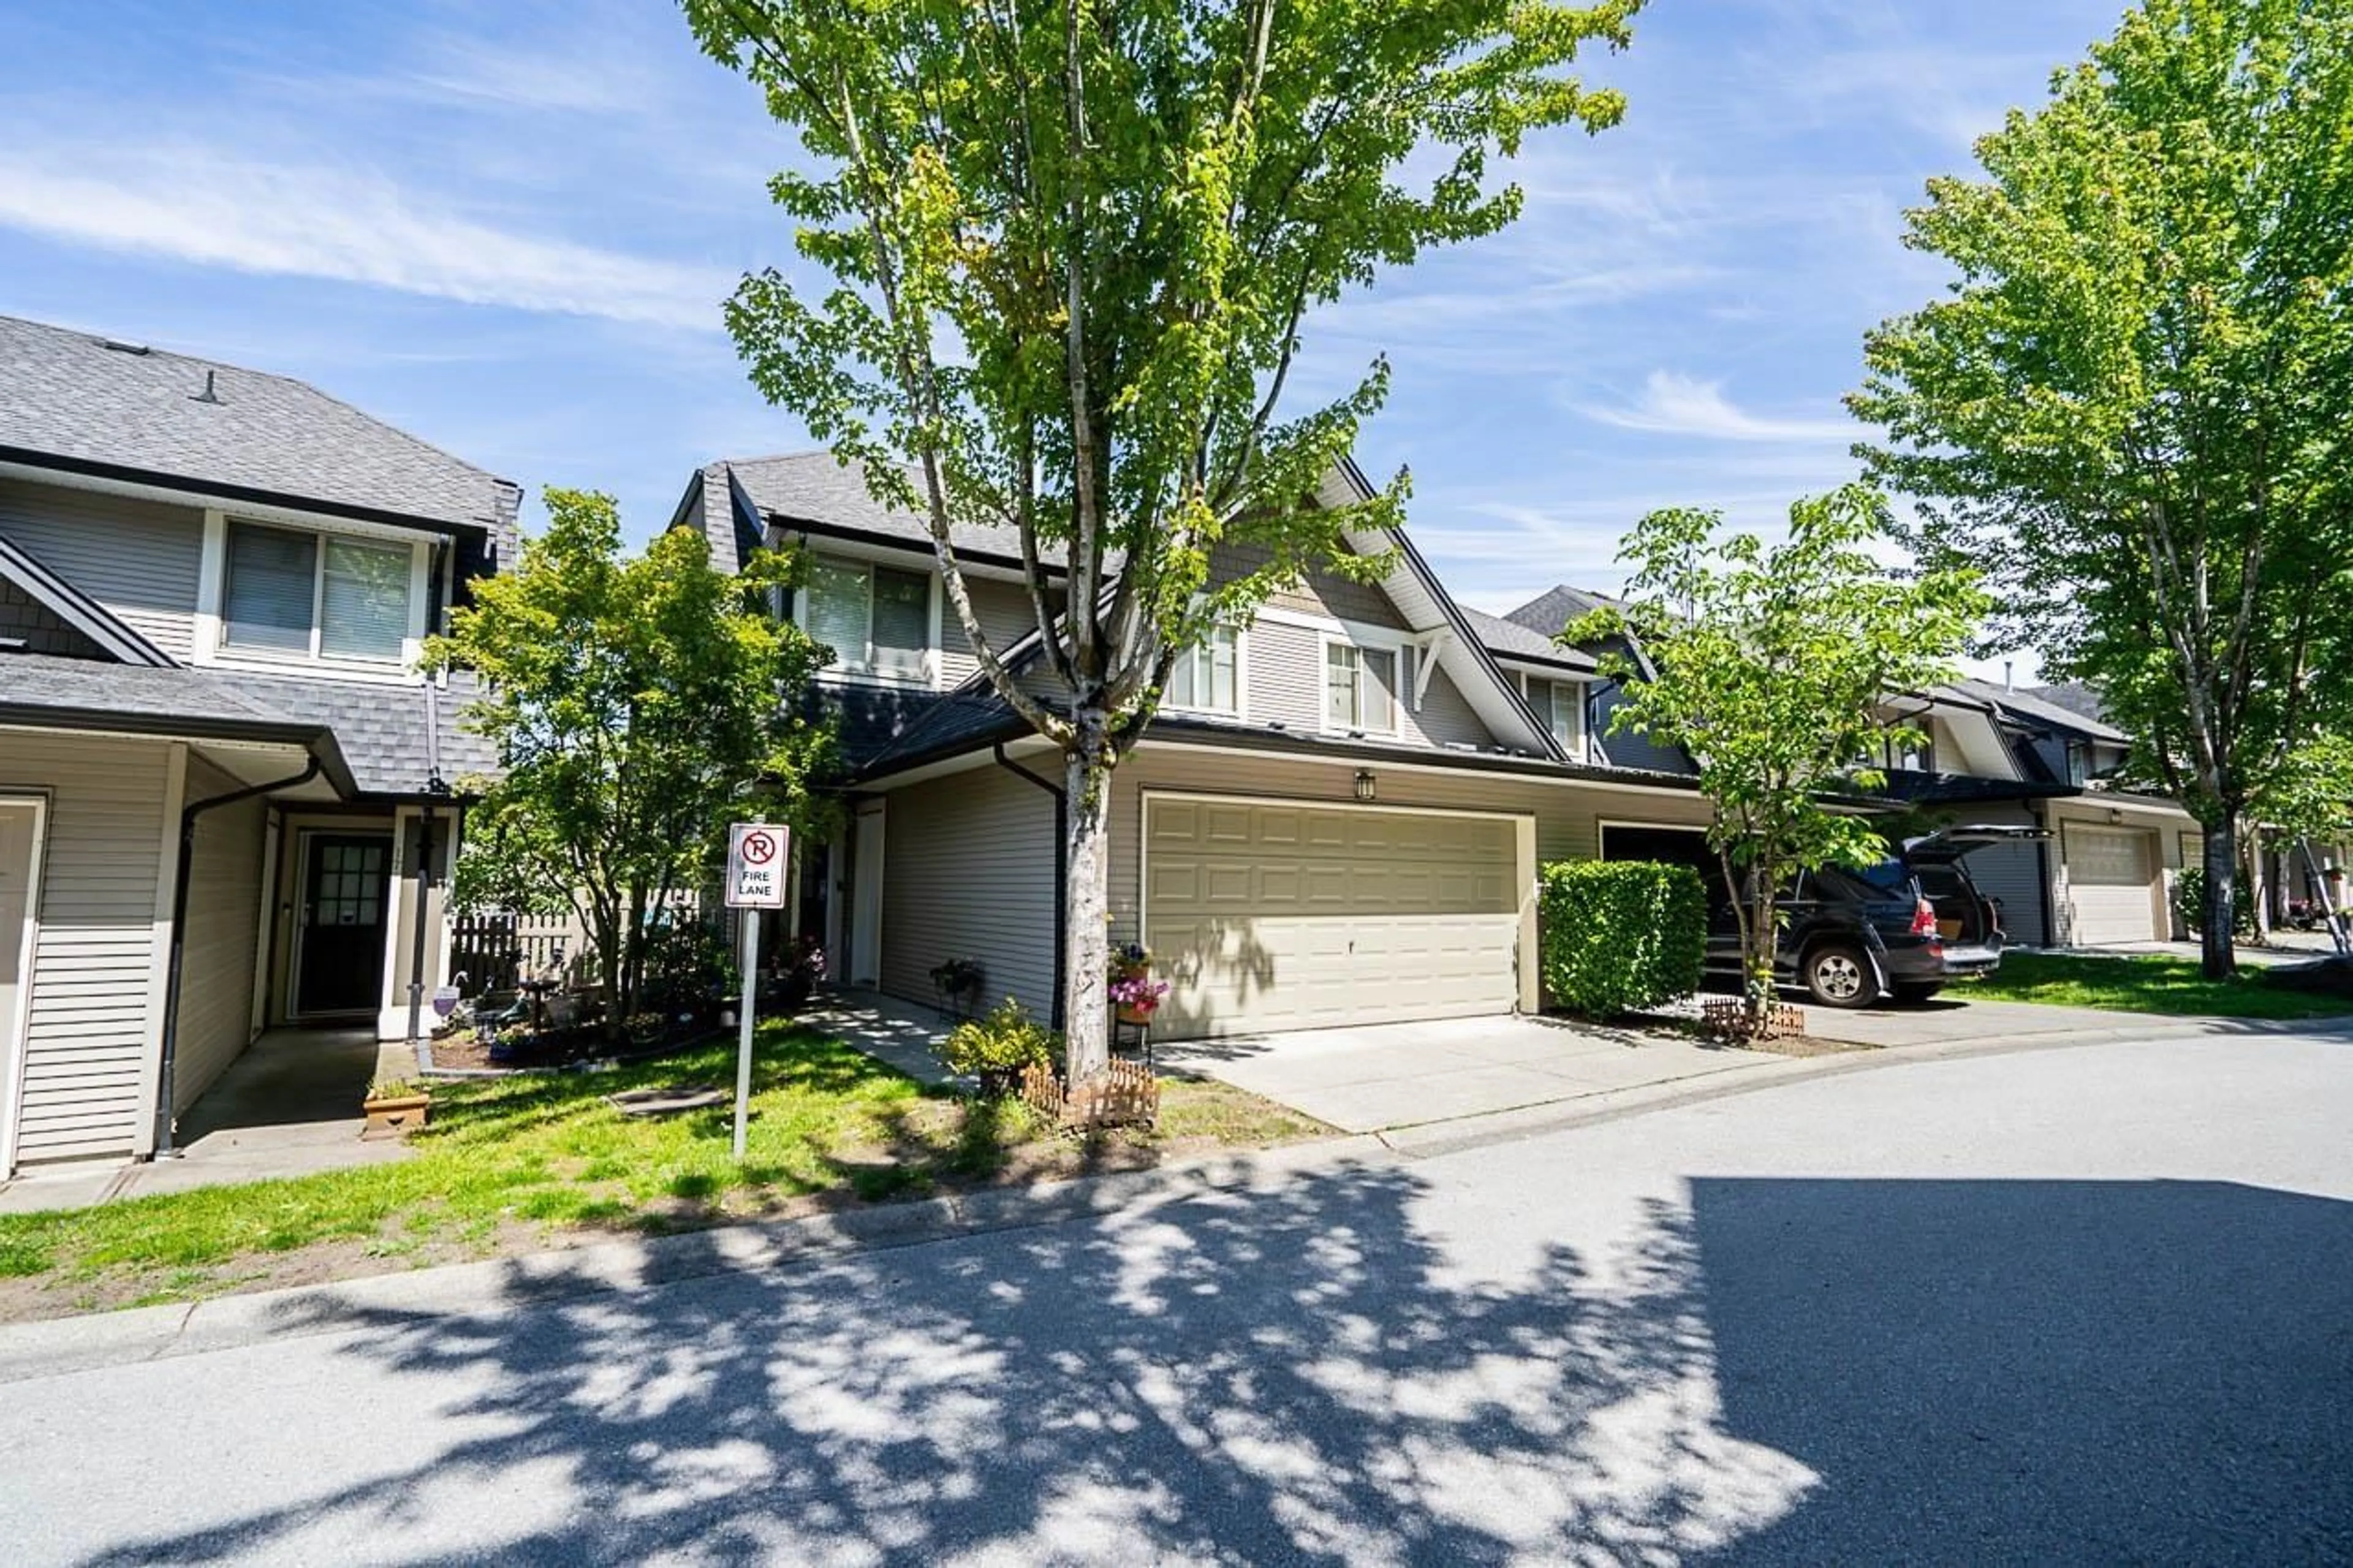 A pic from exterior of the house or condo for 16 15152 62A AVENUE, Surrey British Columbia V3S1V1